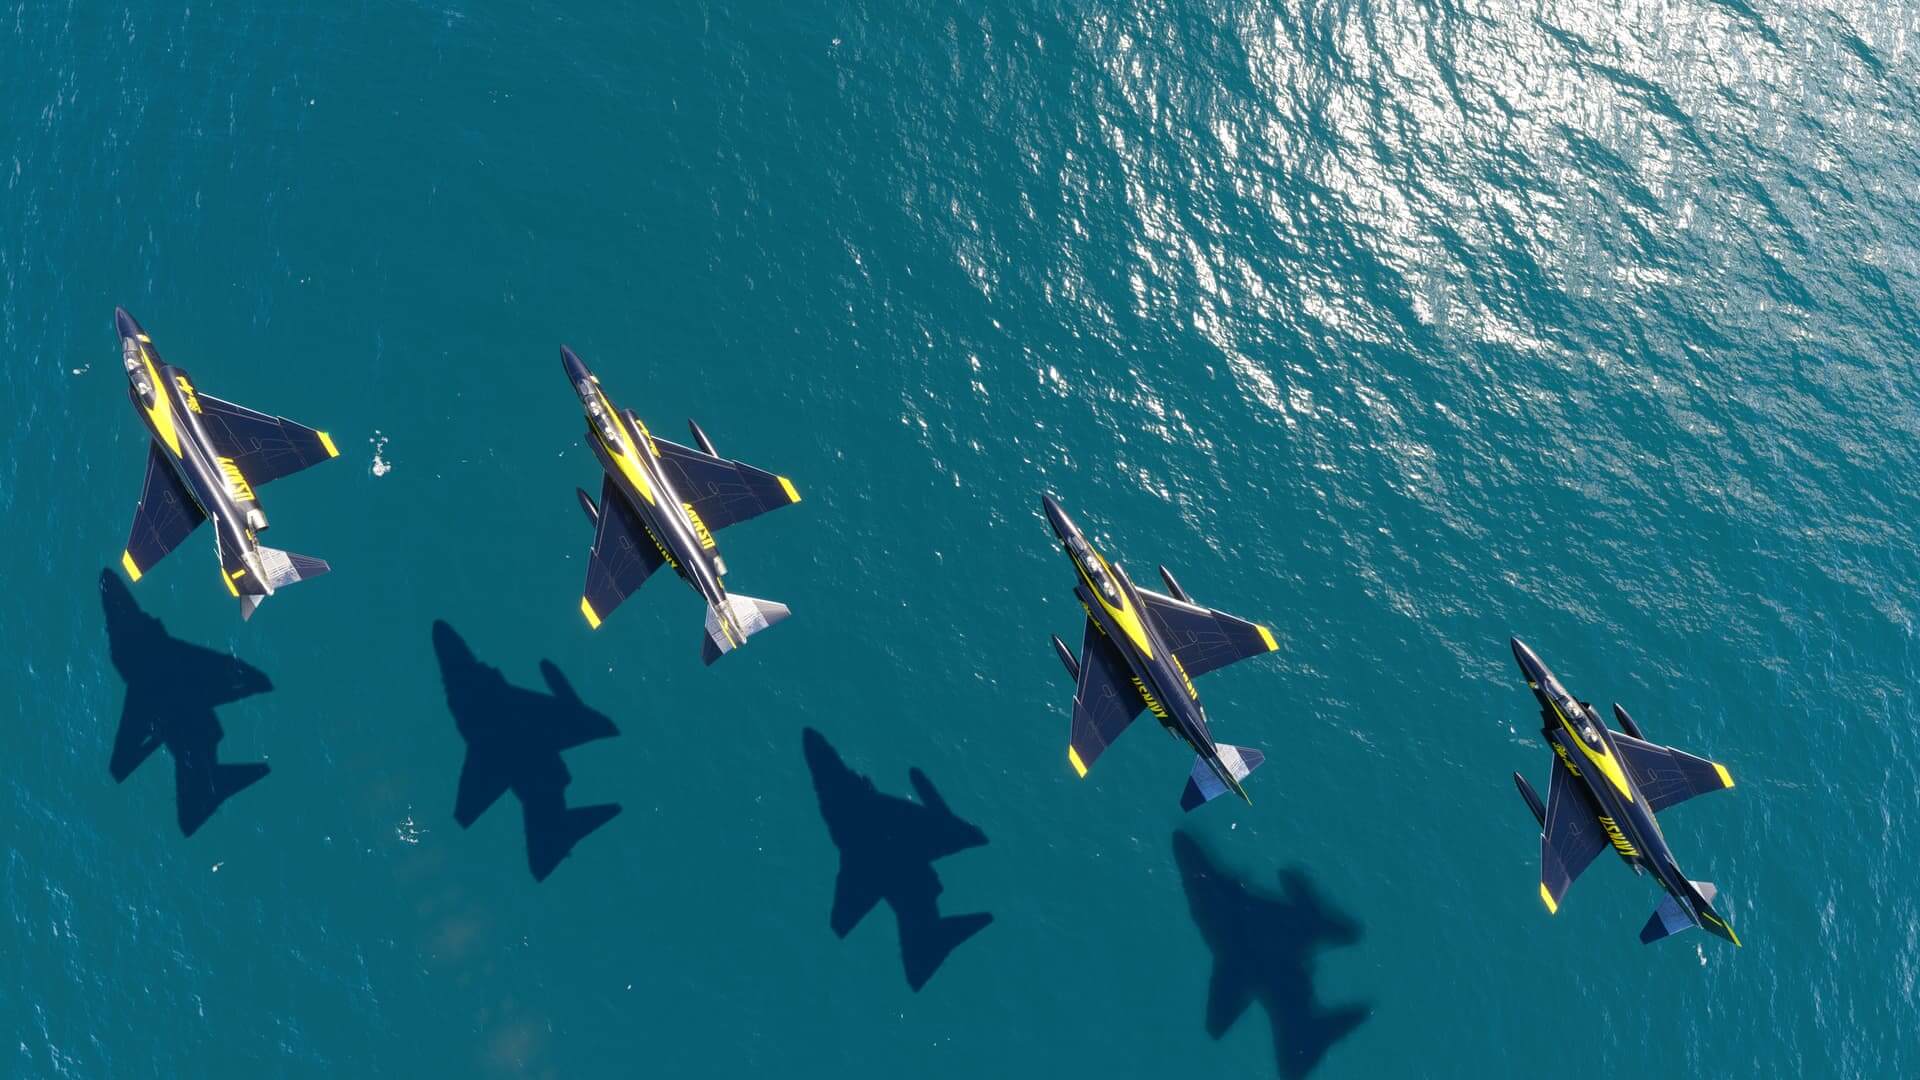 Four McDonnell Douglas F4 Phantom's in Blue Angels paint scheme fly in close formation over water with their shadows casting on the surface below.